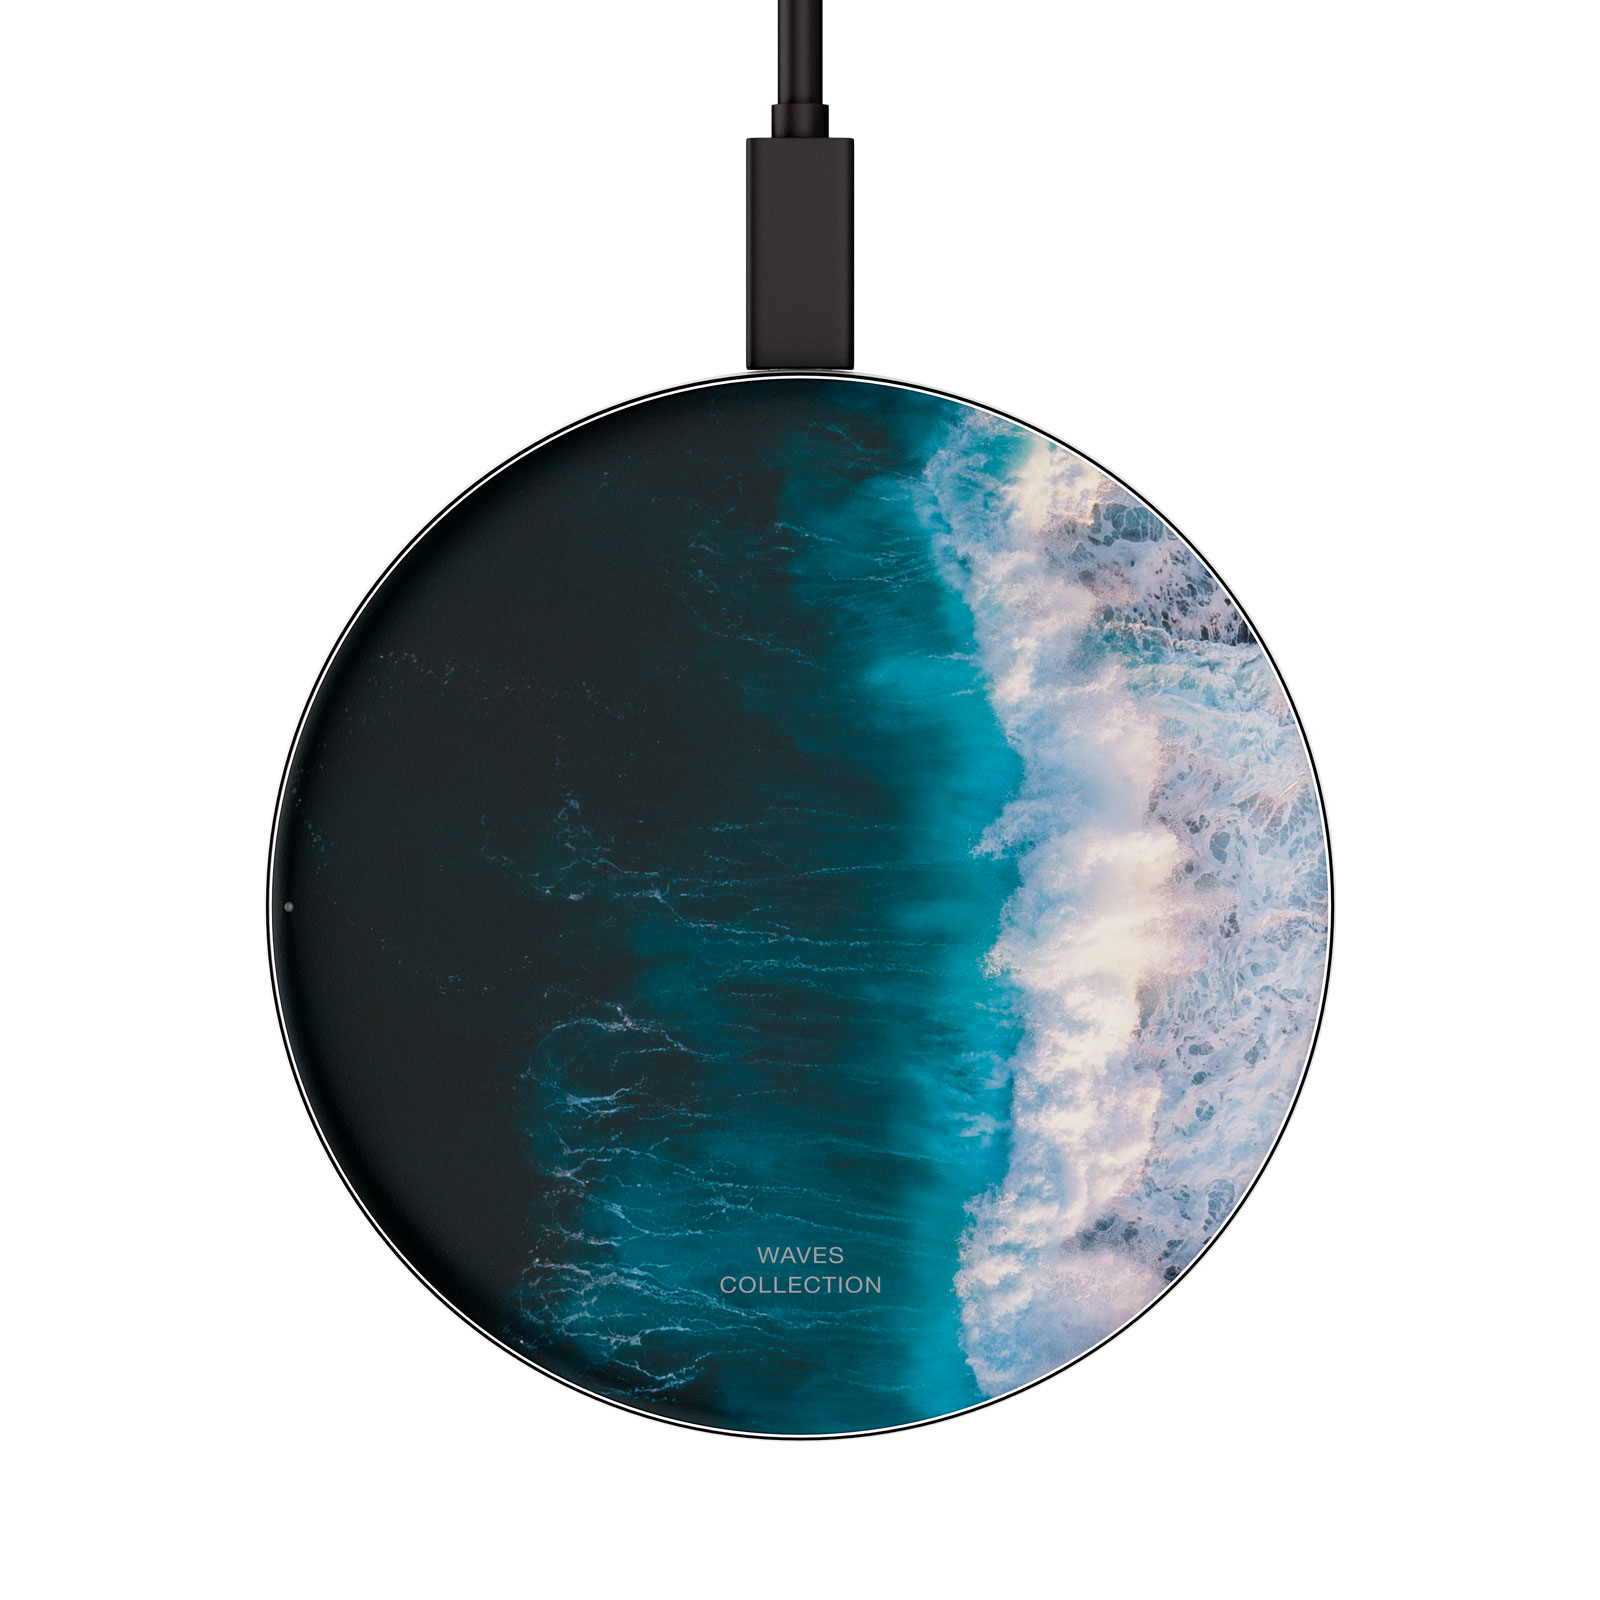 WAVES-HIGH-wireless-charger.jpg